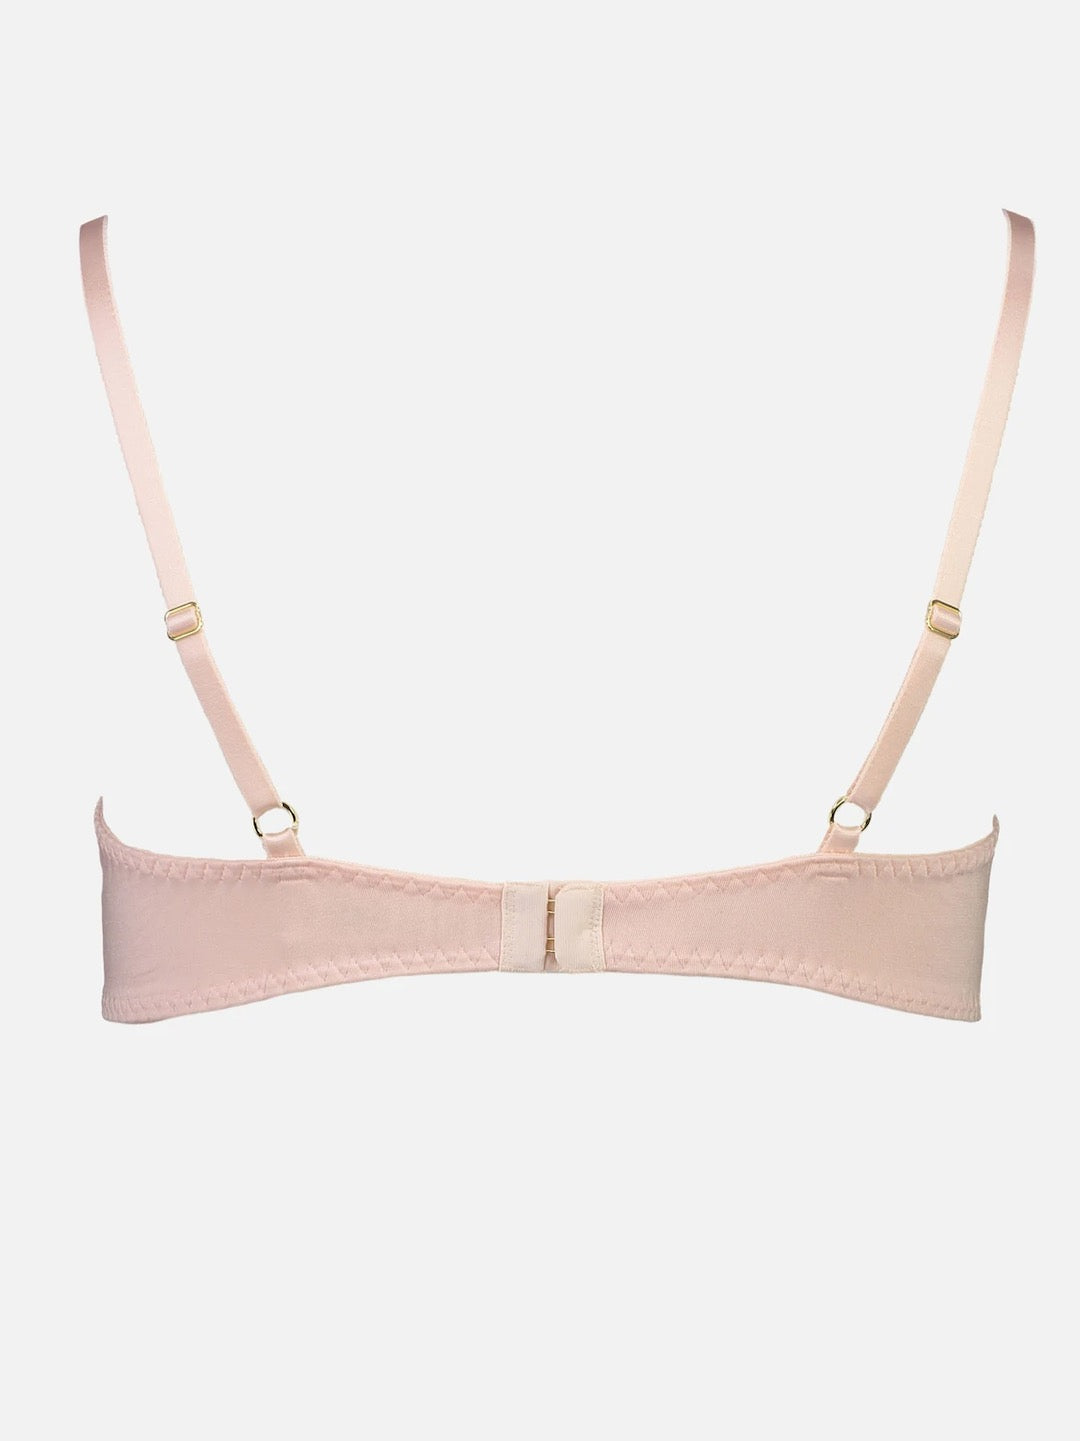 A pink Angela Bra – Rosy with two straps on the back made by Videris.